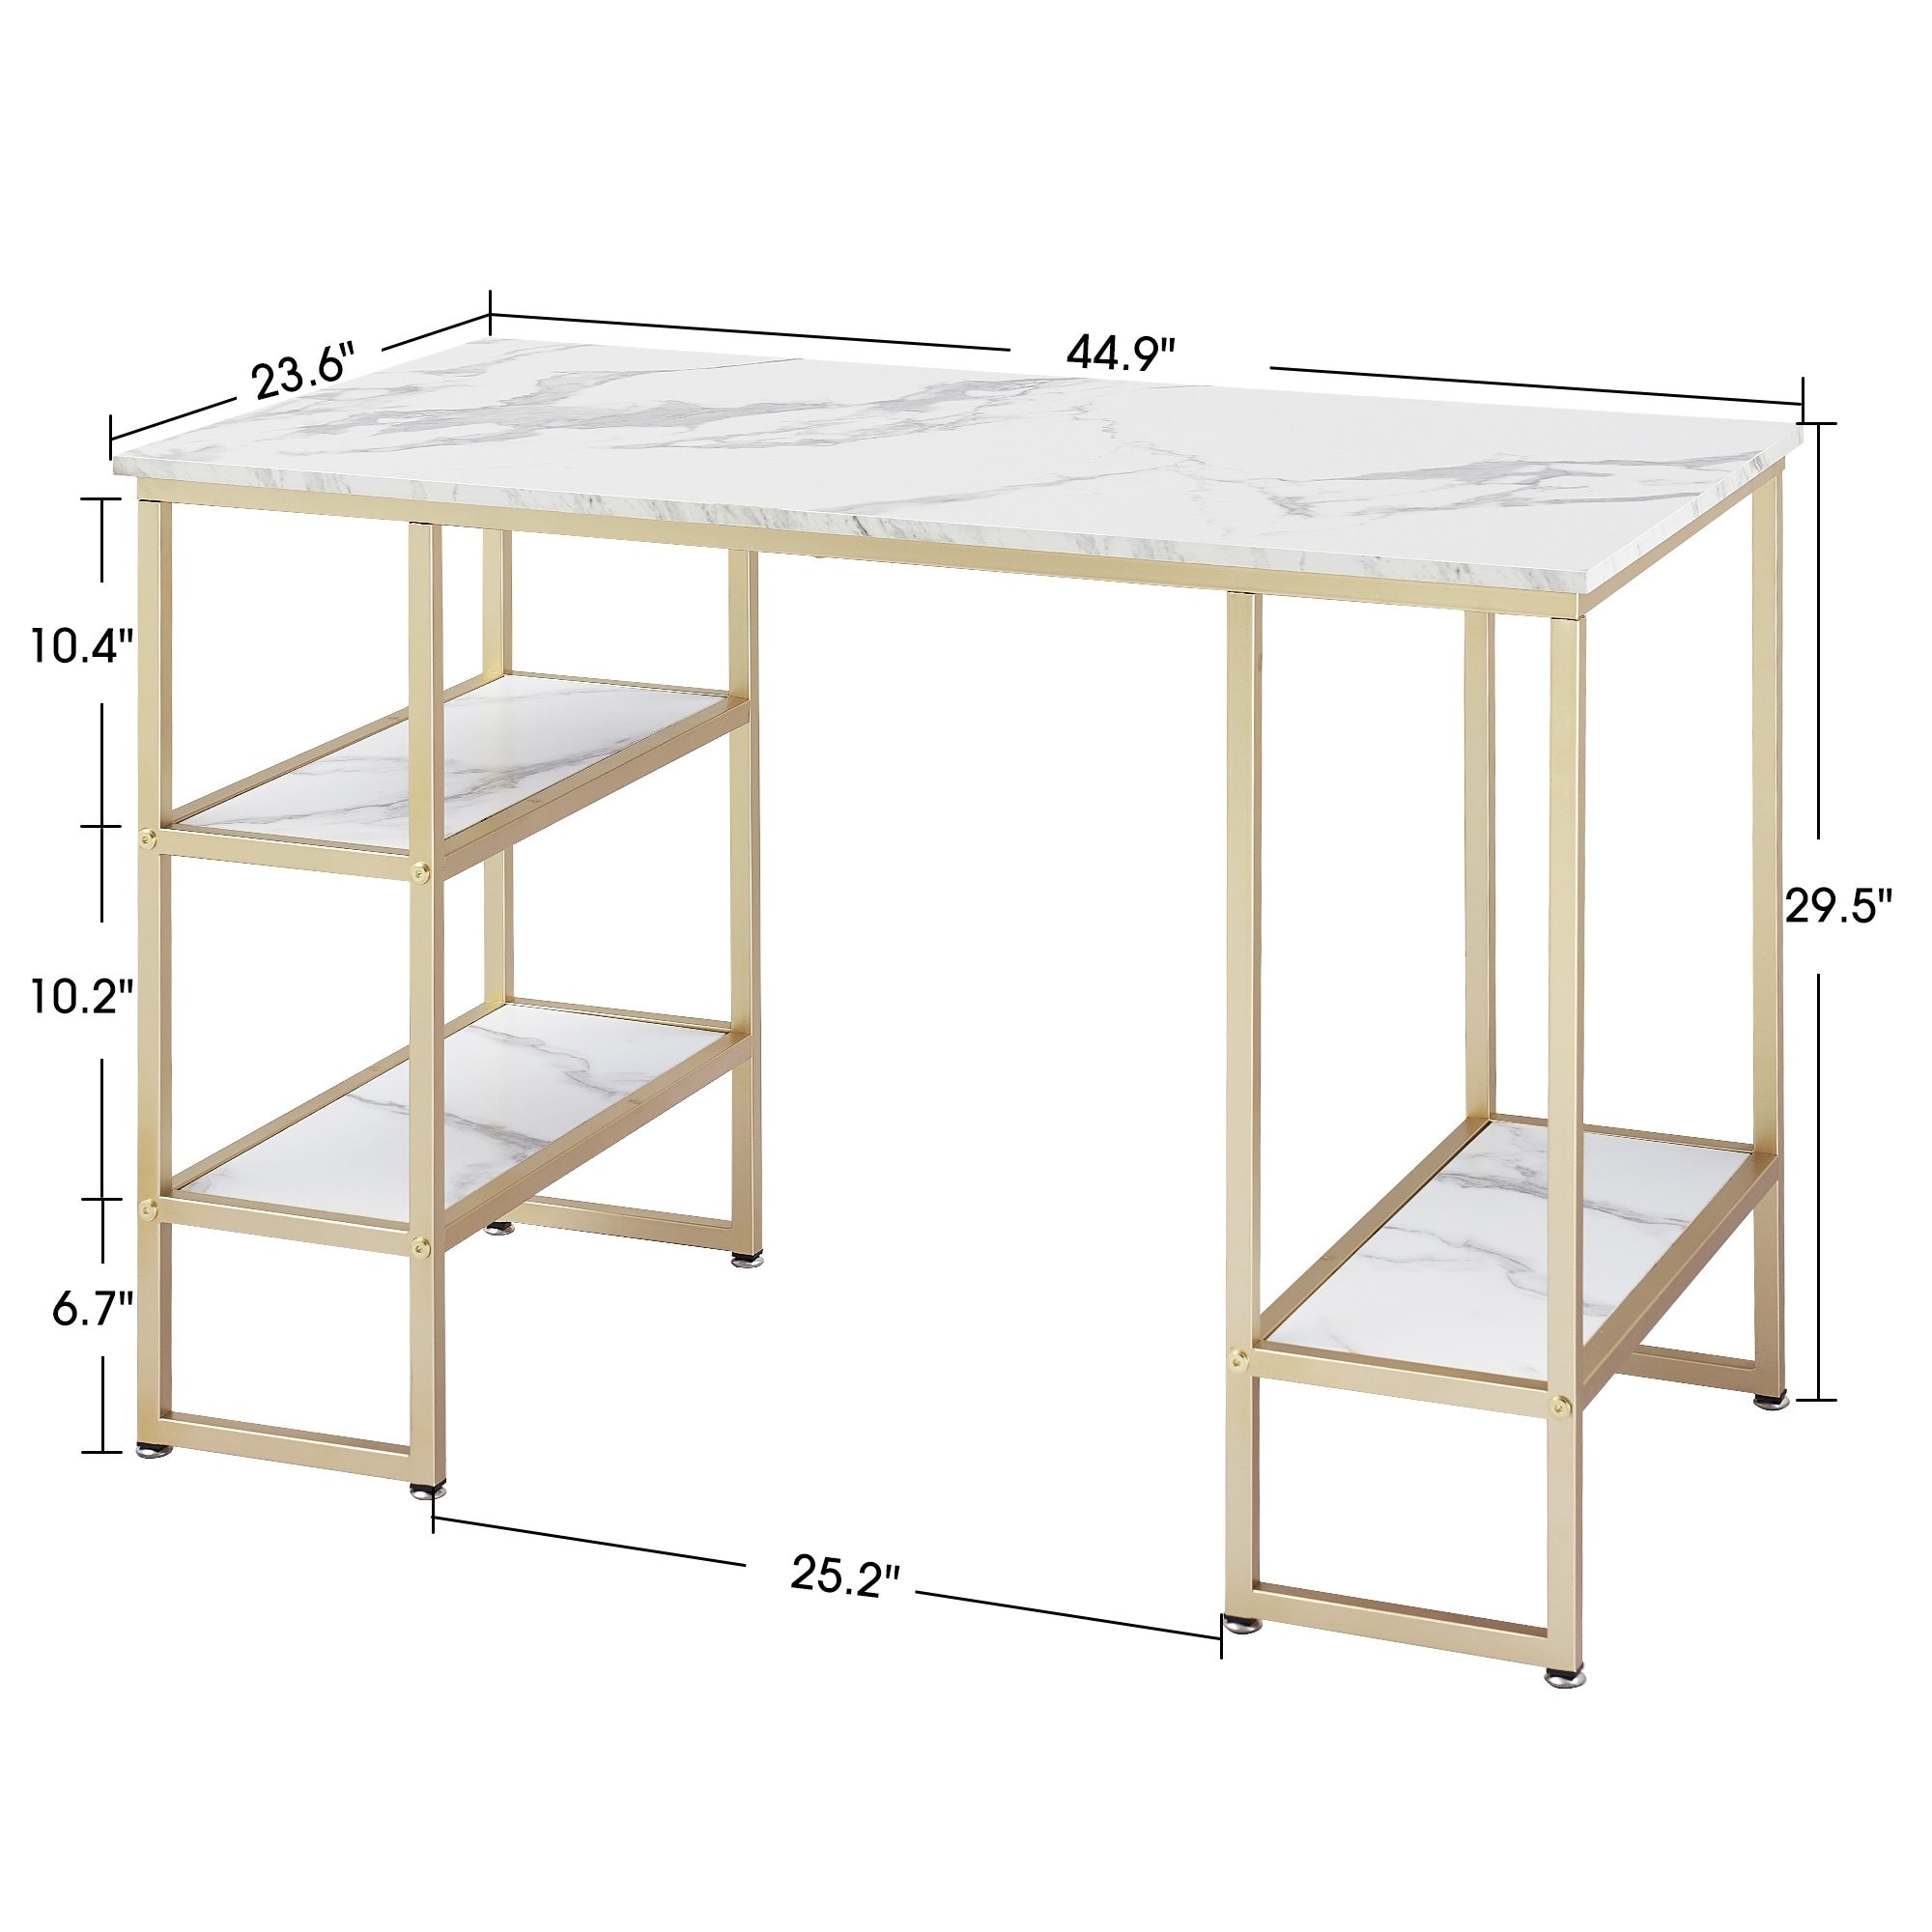 https://ak1.ostkcdn.com/images/products/is/images/direct/5e4e24fafdae0ee6b9d57fff60071be7aaef7e76/Ivinta-Computer-Desk-Office-Desk-with-3-Tier-Shelves%2C-White-Desk-for-Small-Space%2C-Gaming-Desk-with-CPU-Stand%2C-Vanity-Desk.jpg